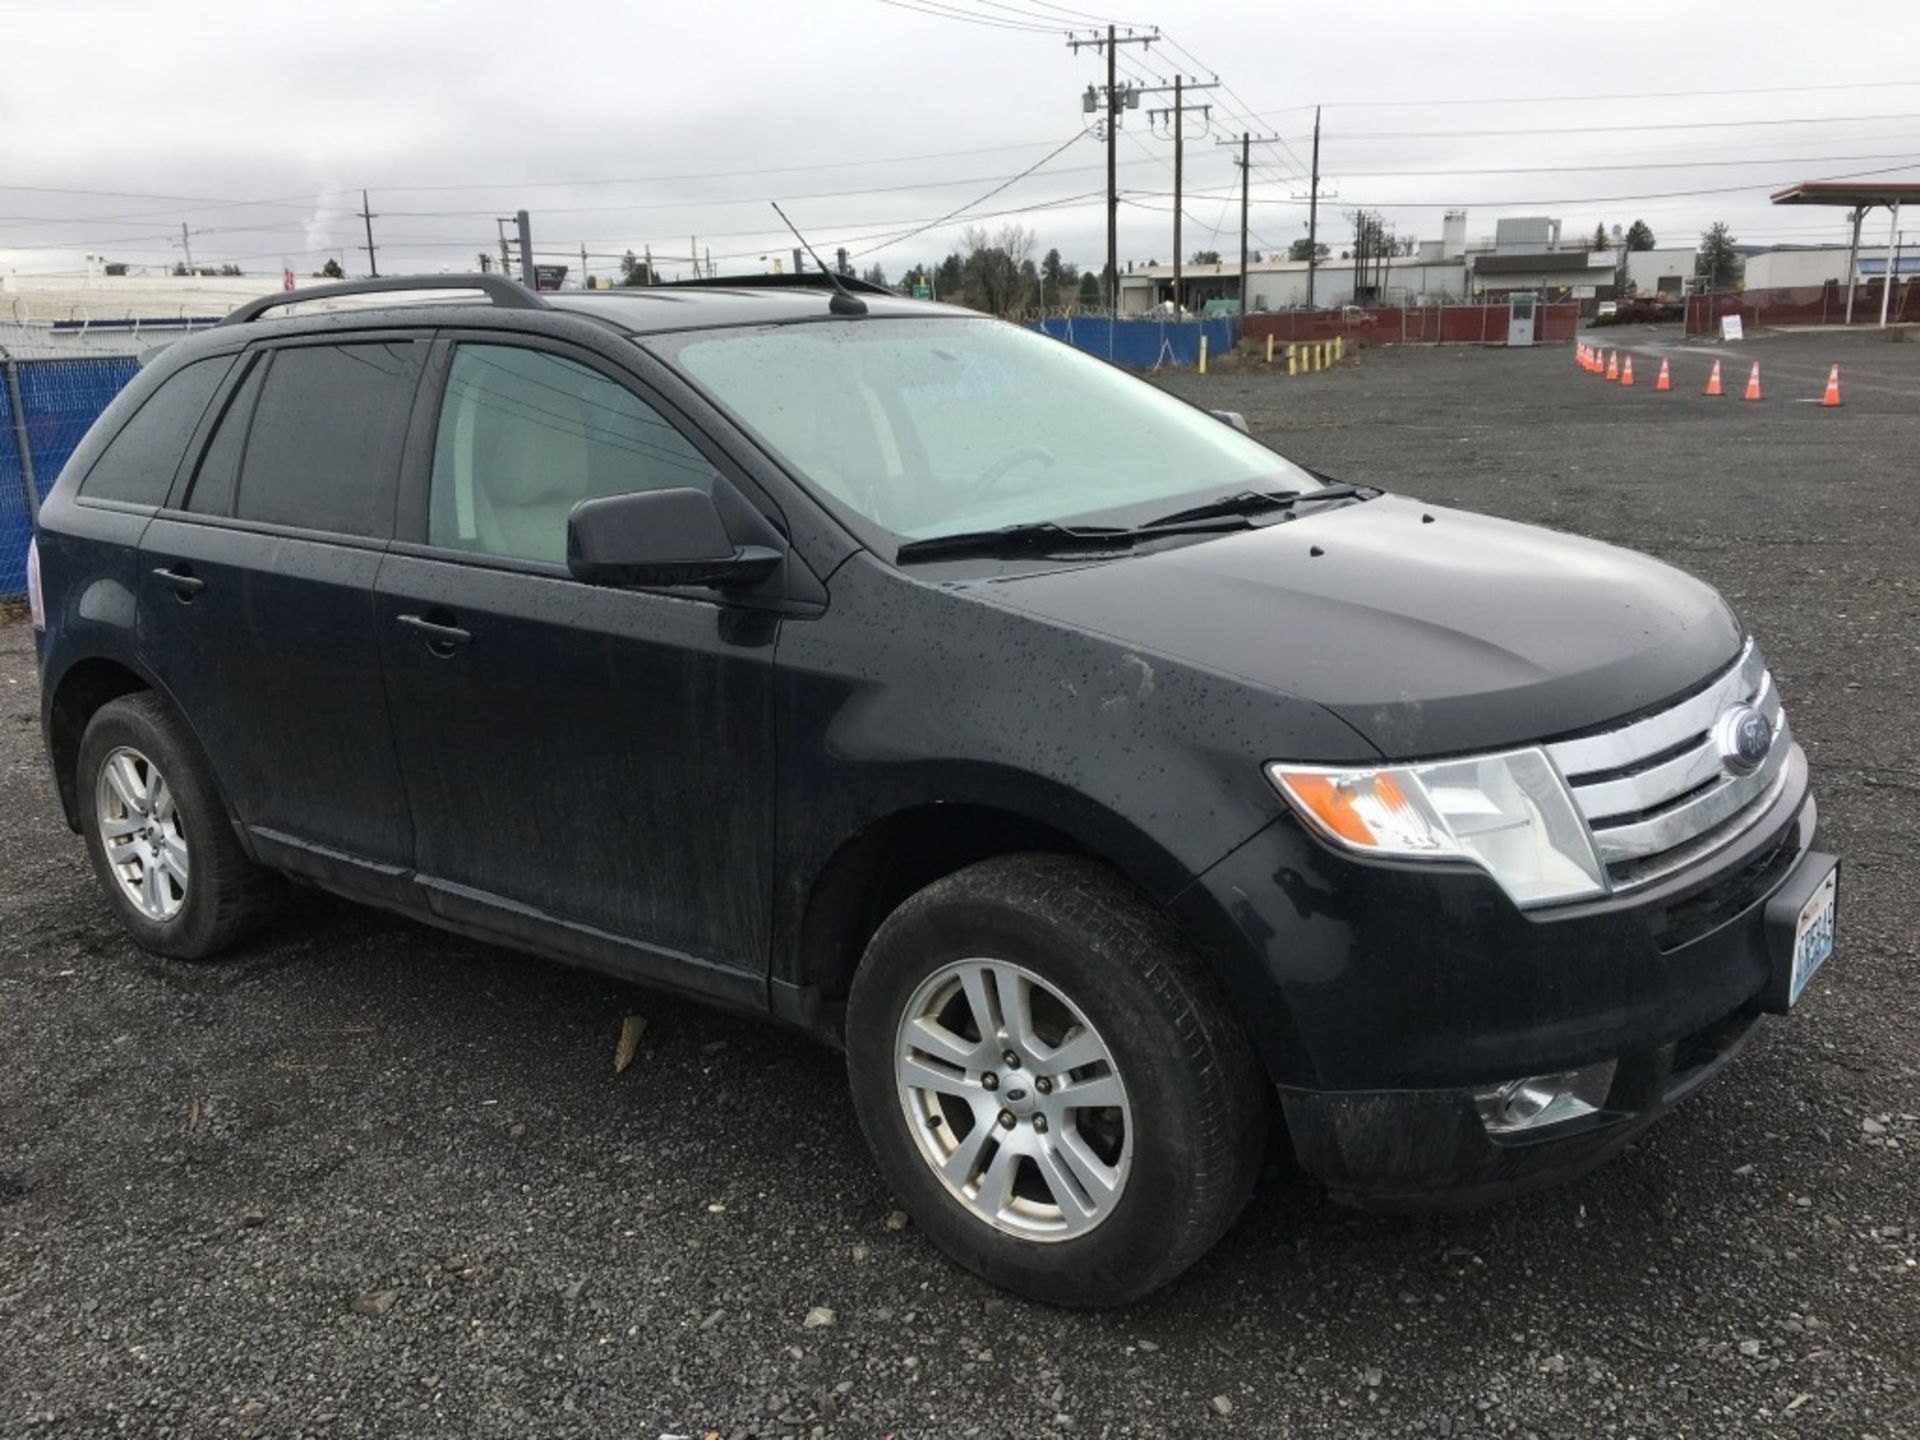 2008 Ford Edge SUV - Image 7 of 37